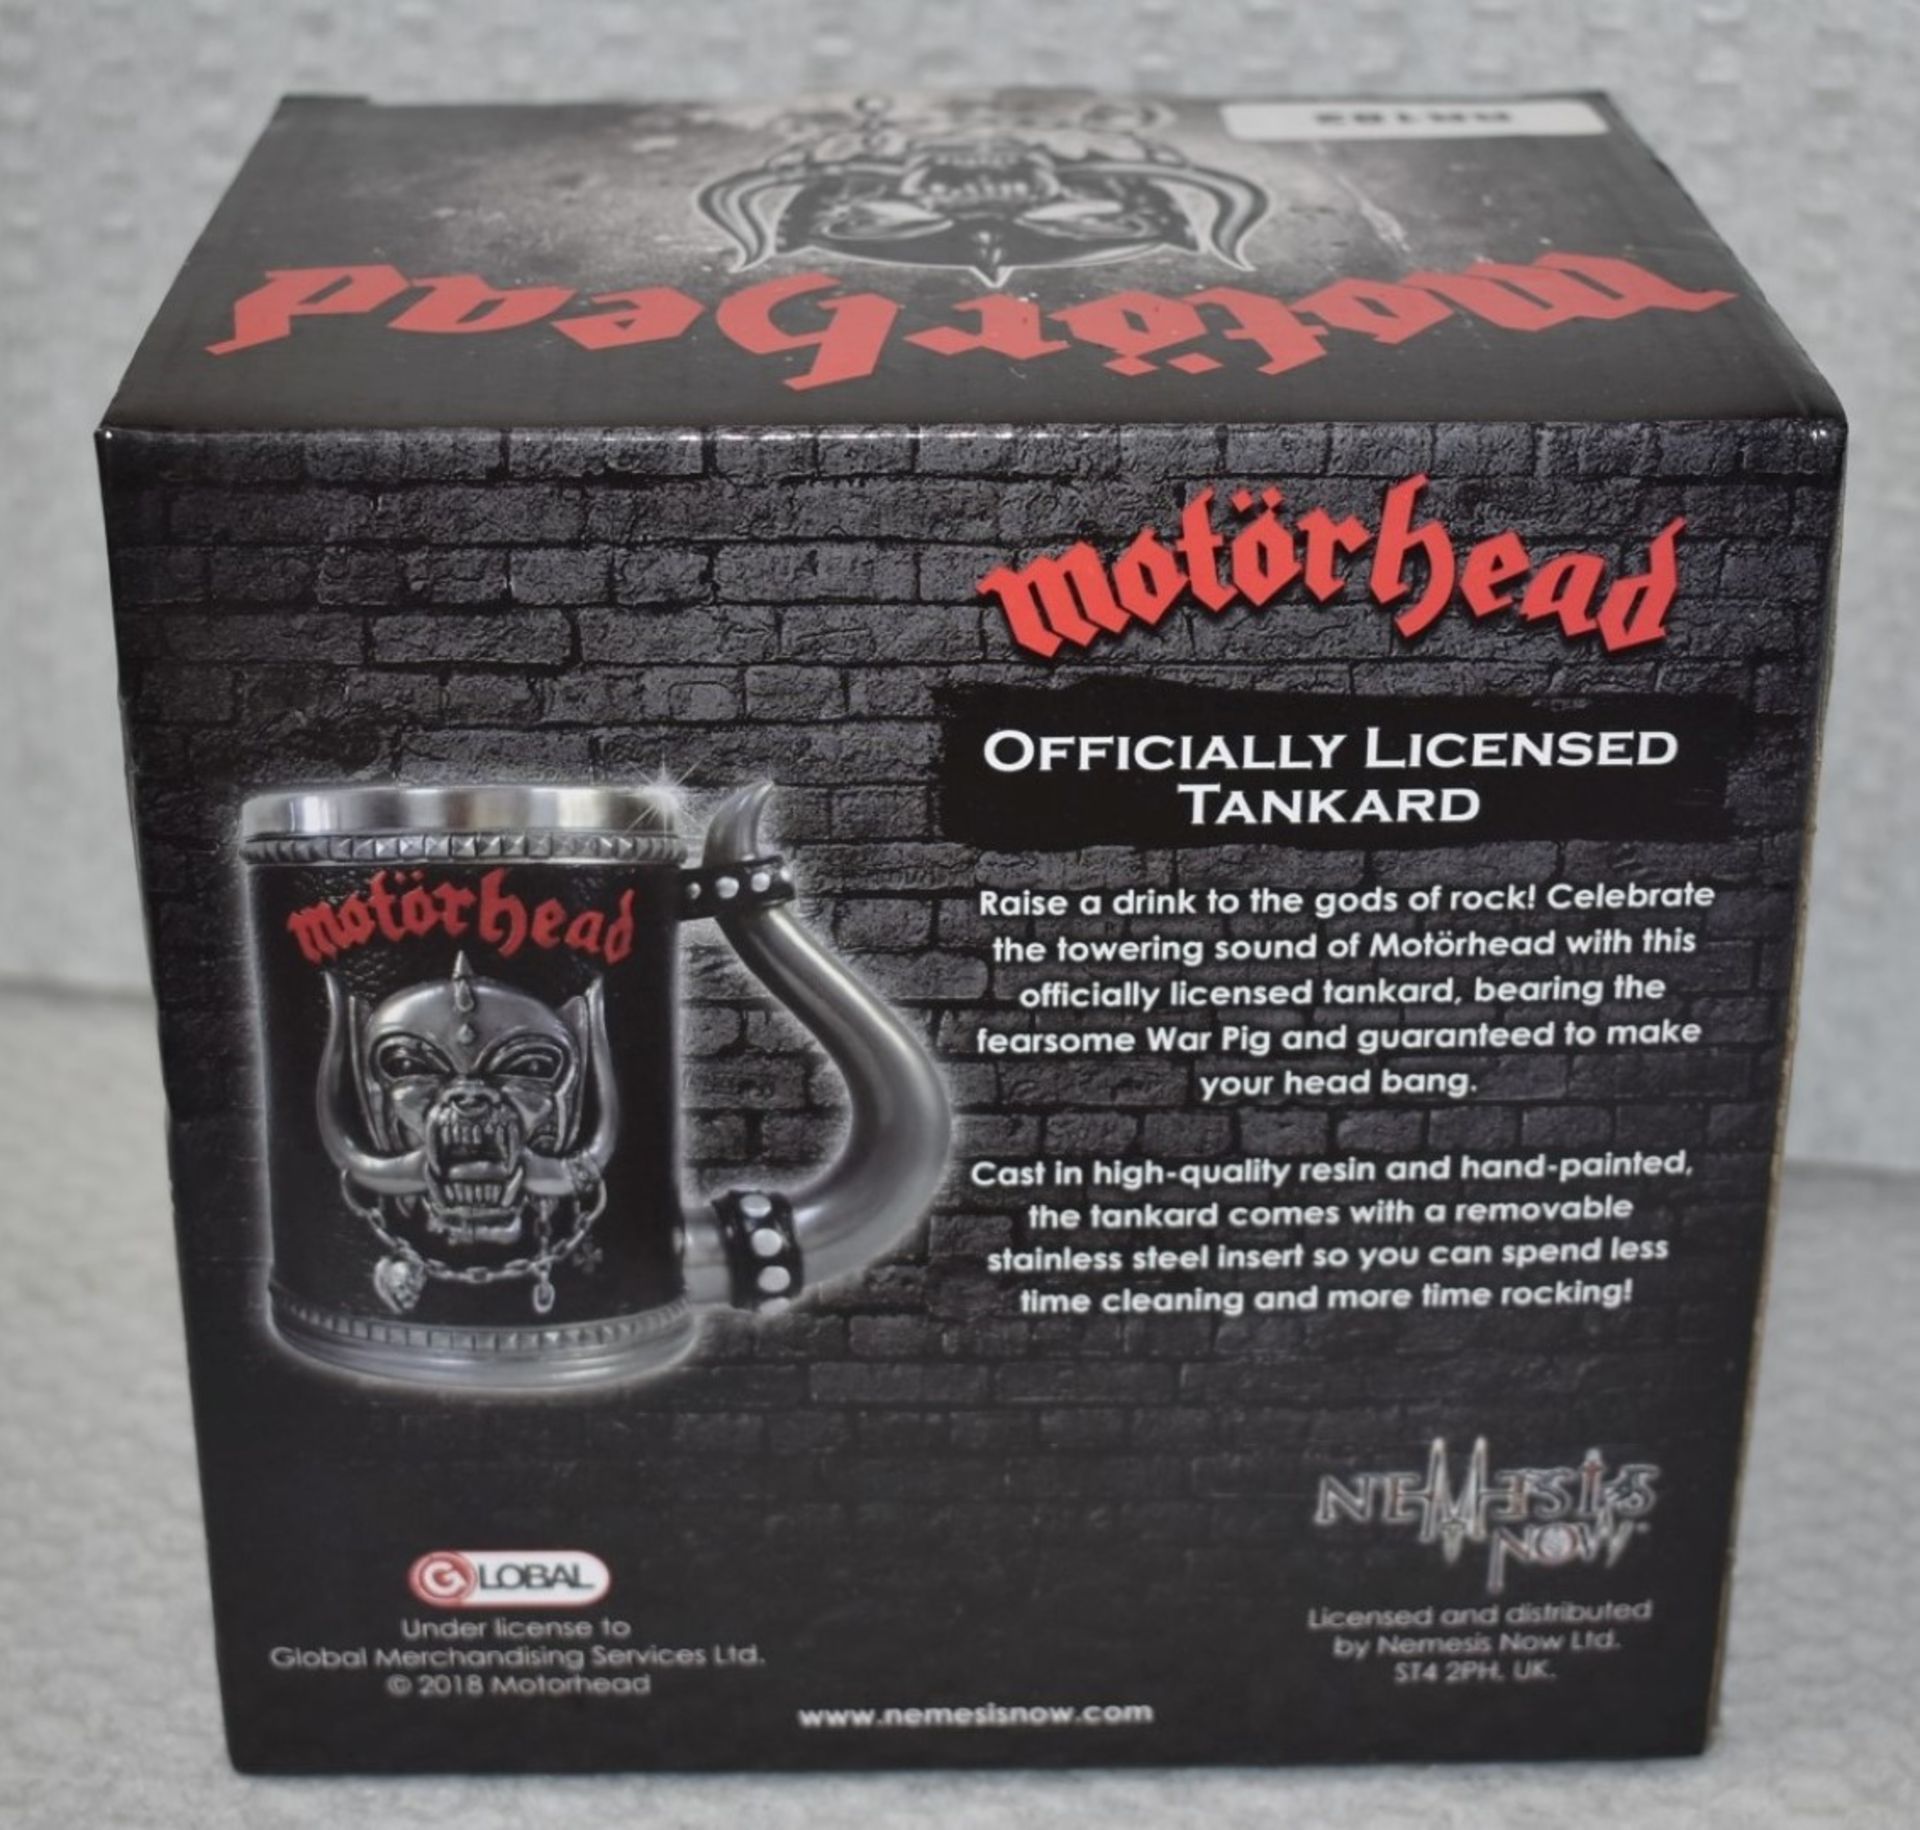 1 x Motorhead Drinks Tanker By Nemesis Now - Features Detailed Warpig Sculpture, Hand Painted - Image 6 of 8